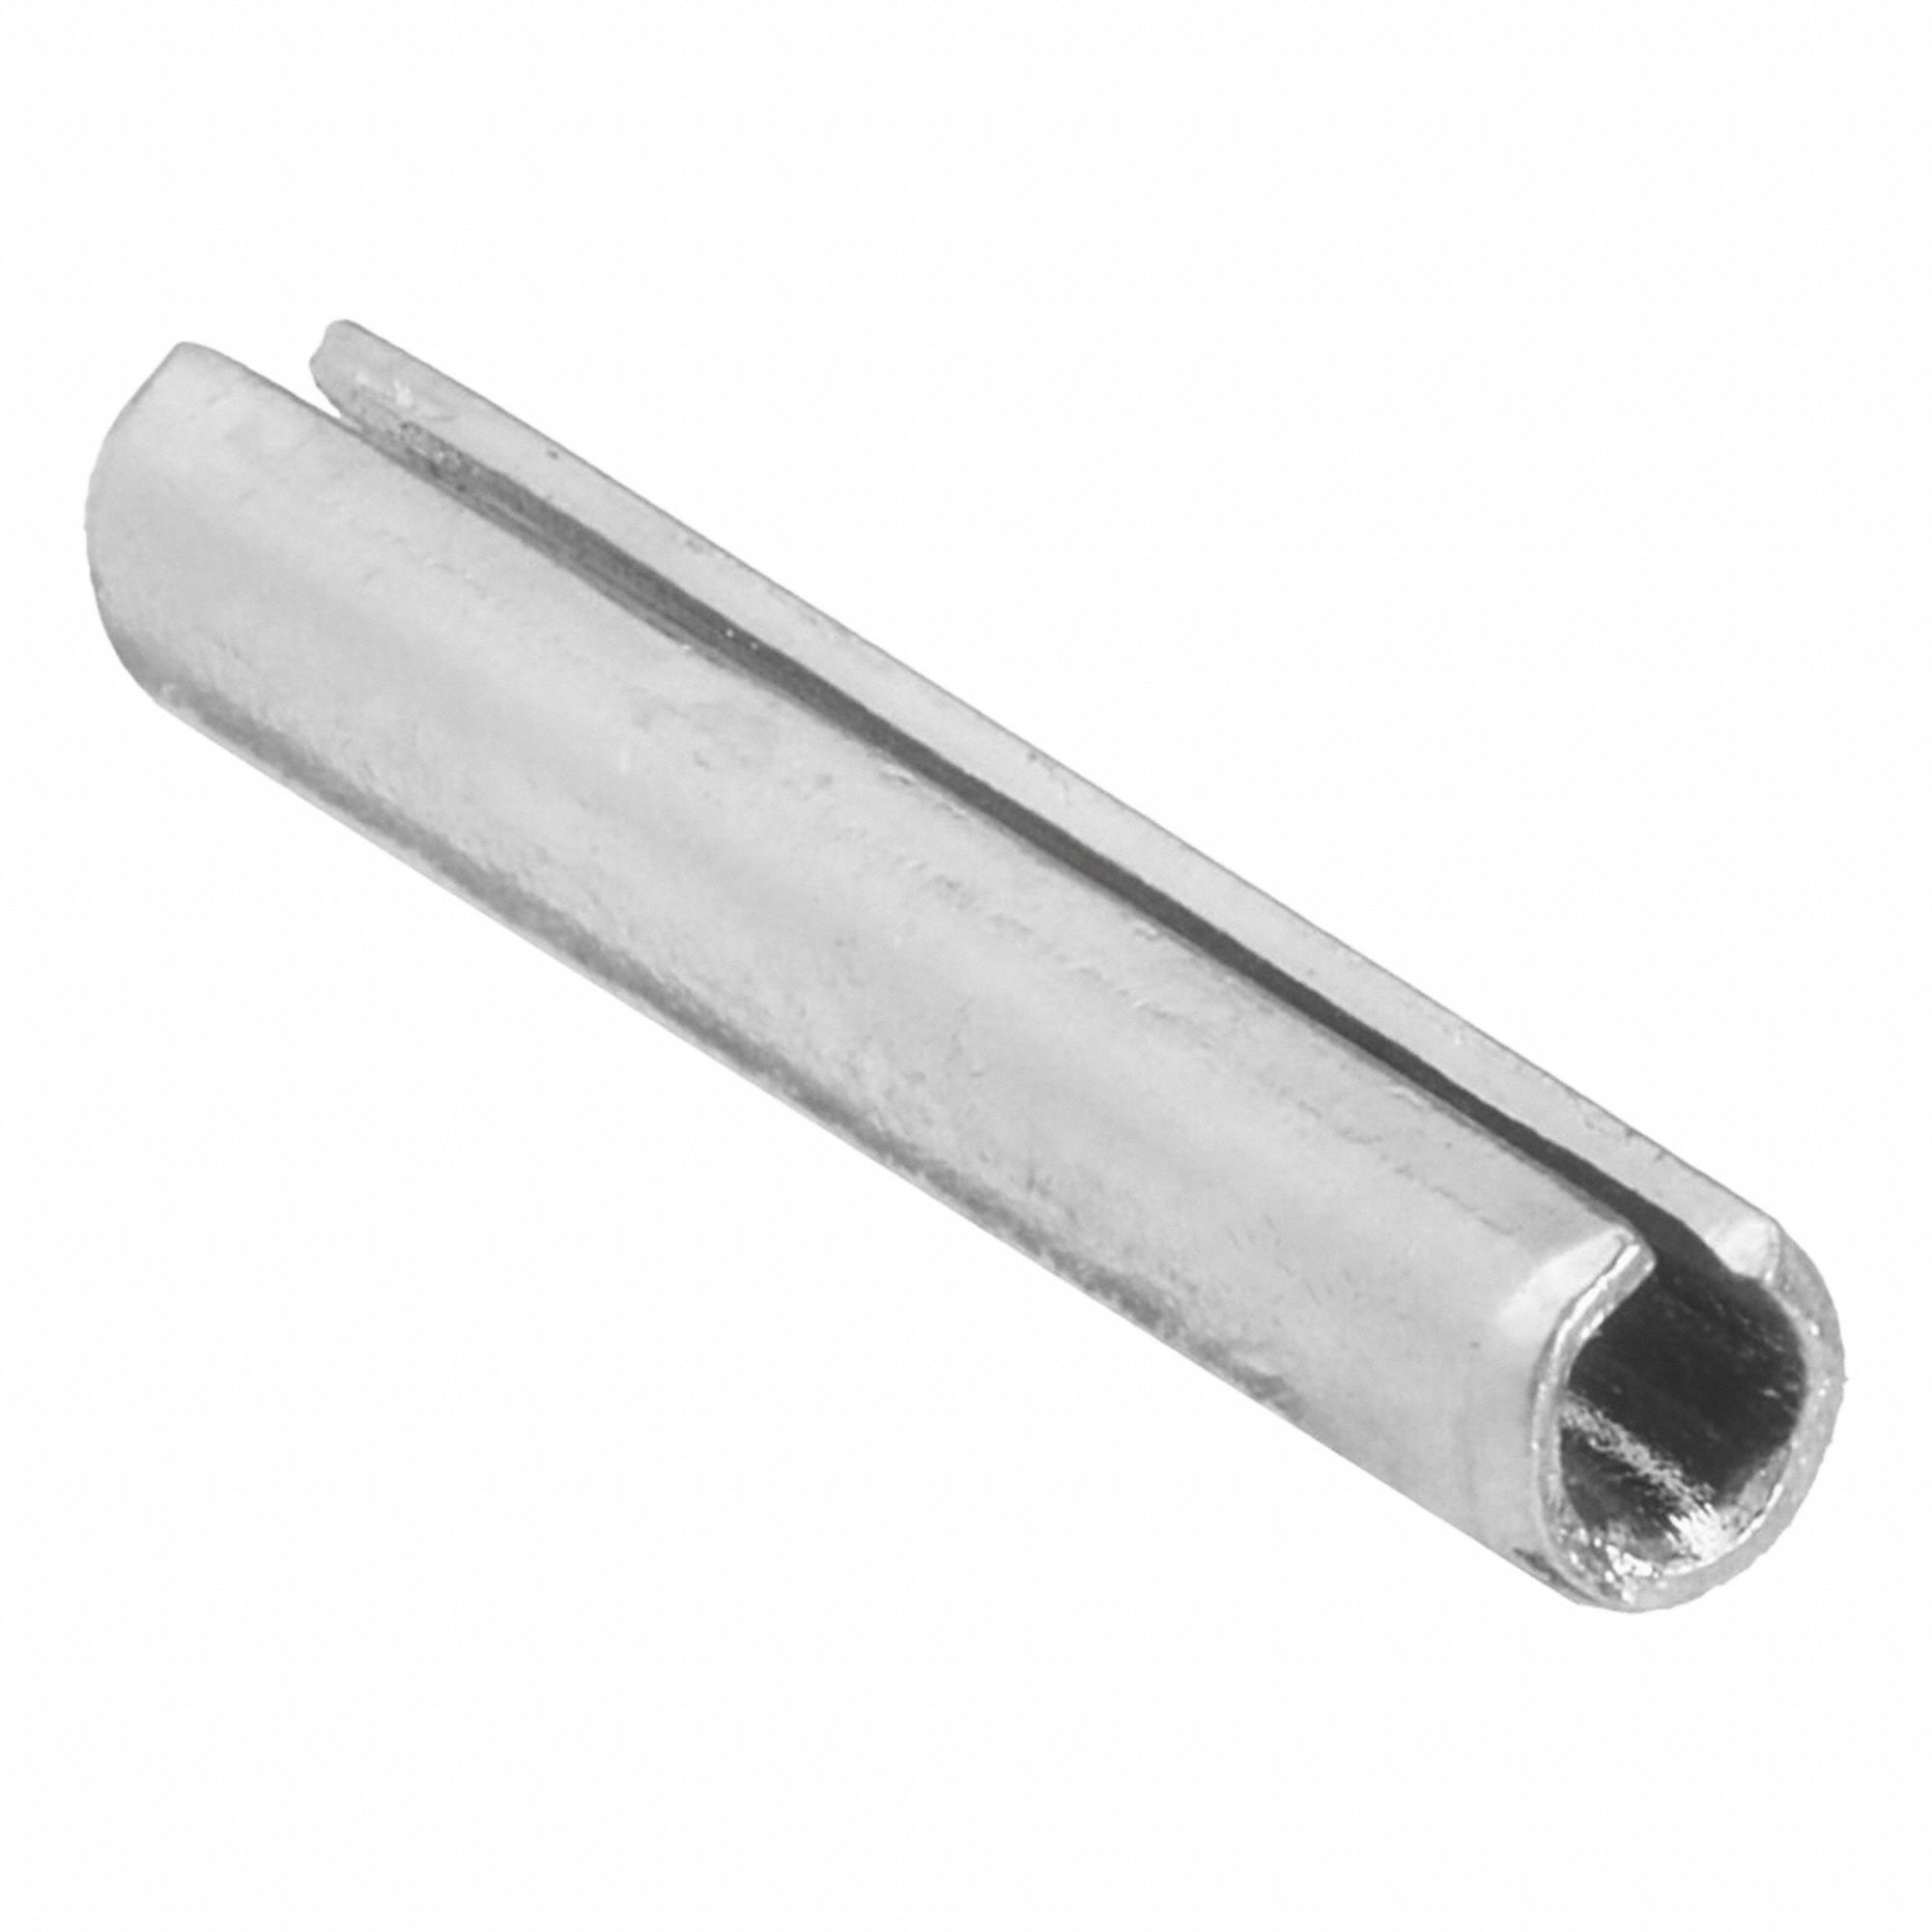 Replacement Stainless Steel Spring Pins